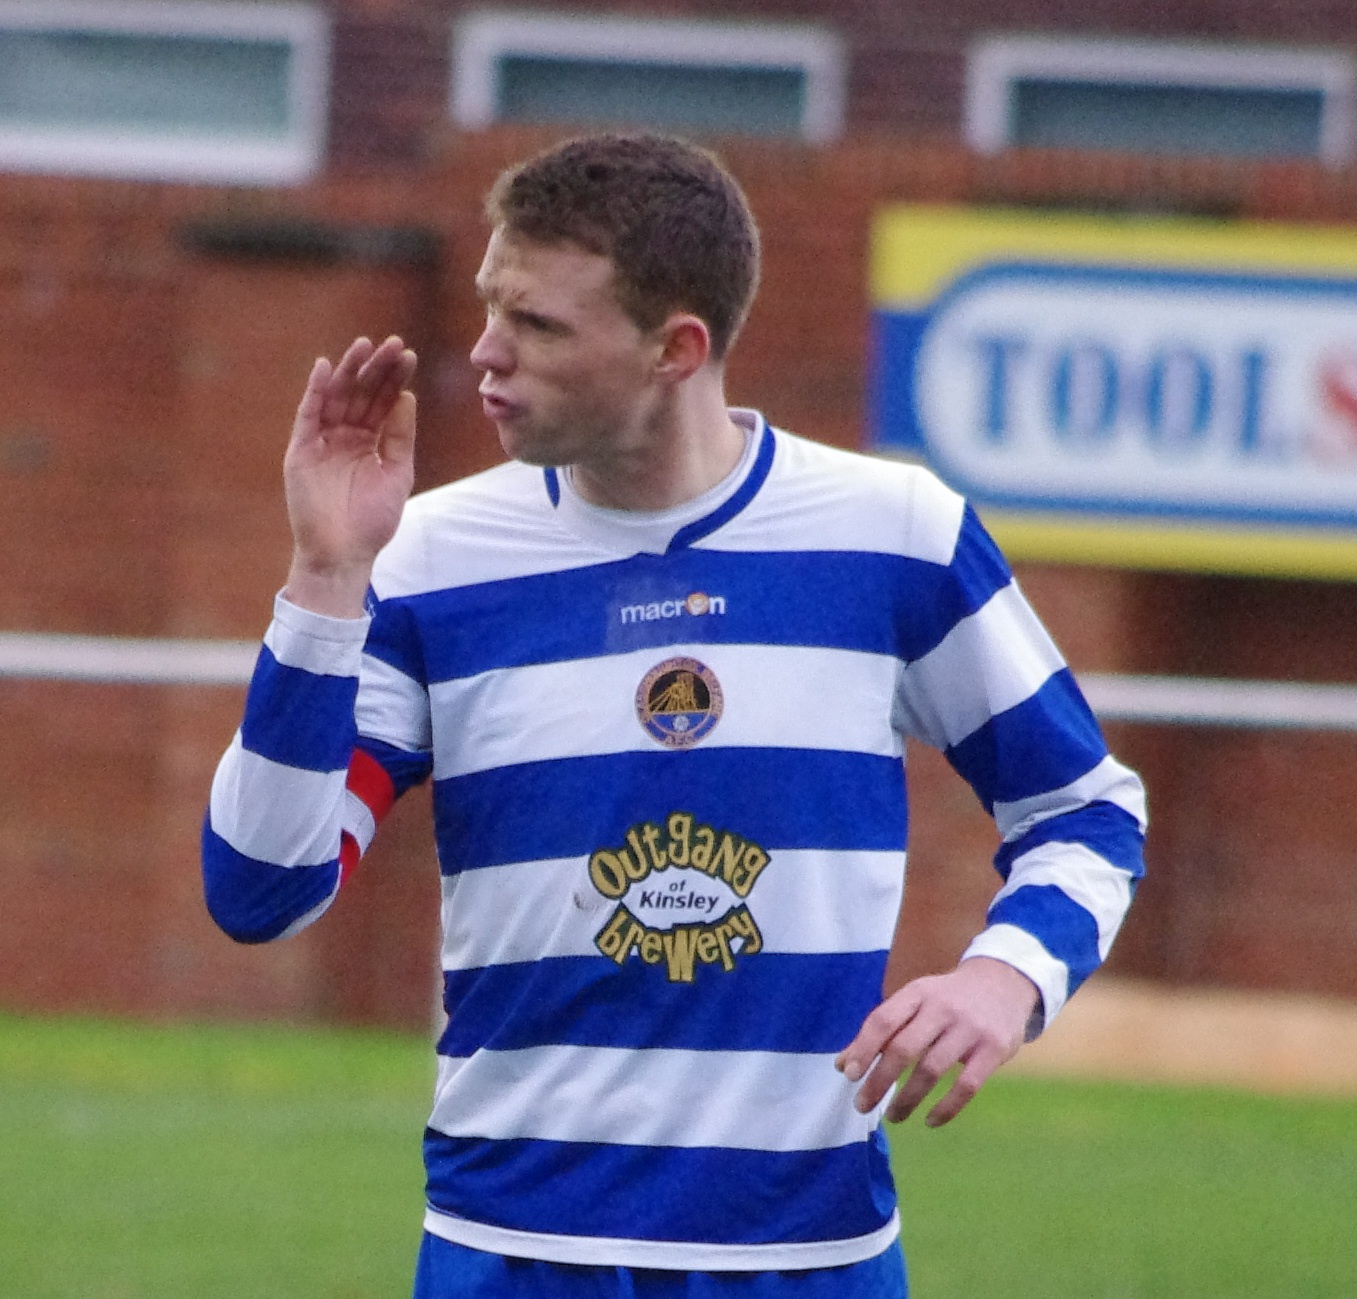 Club captain Darrell Young was yellow carded for the eighth time this season